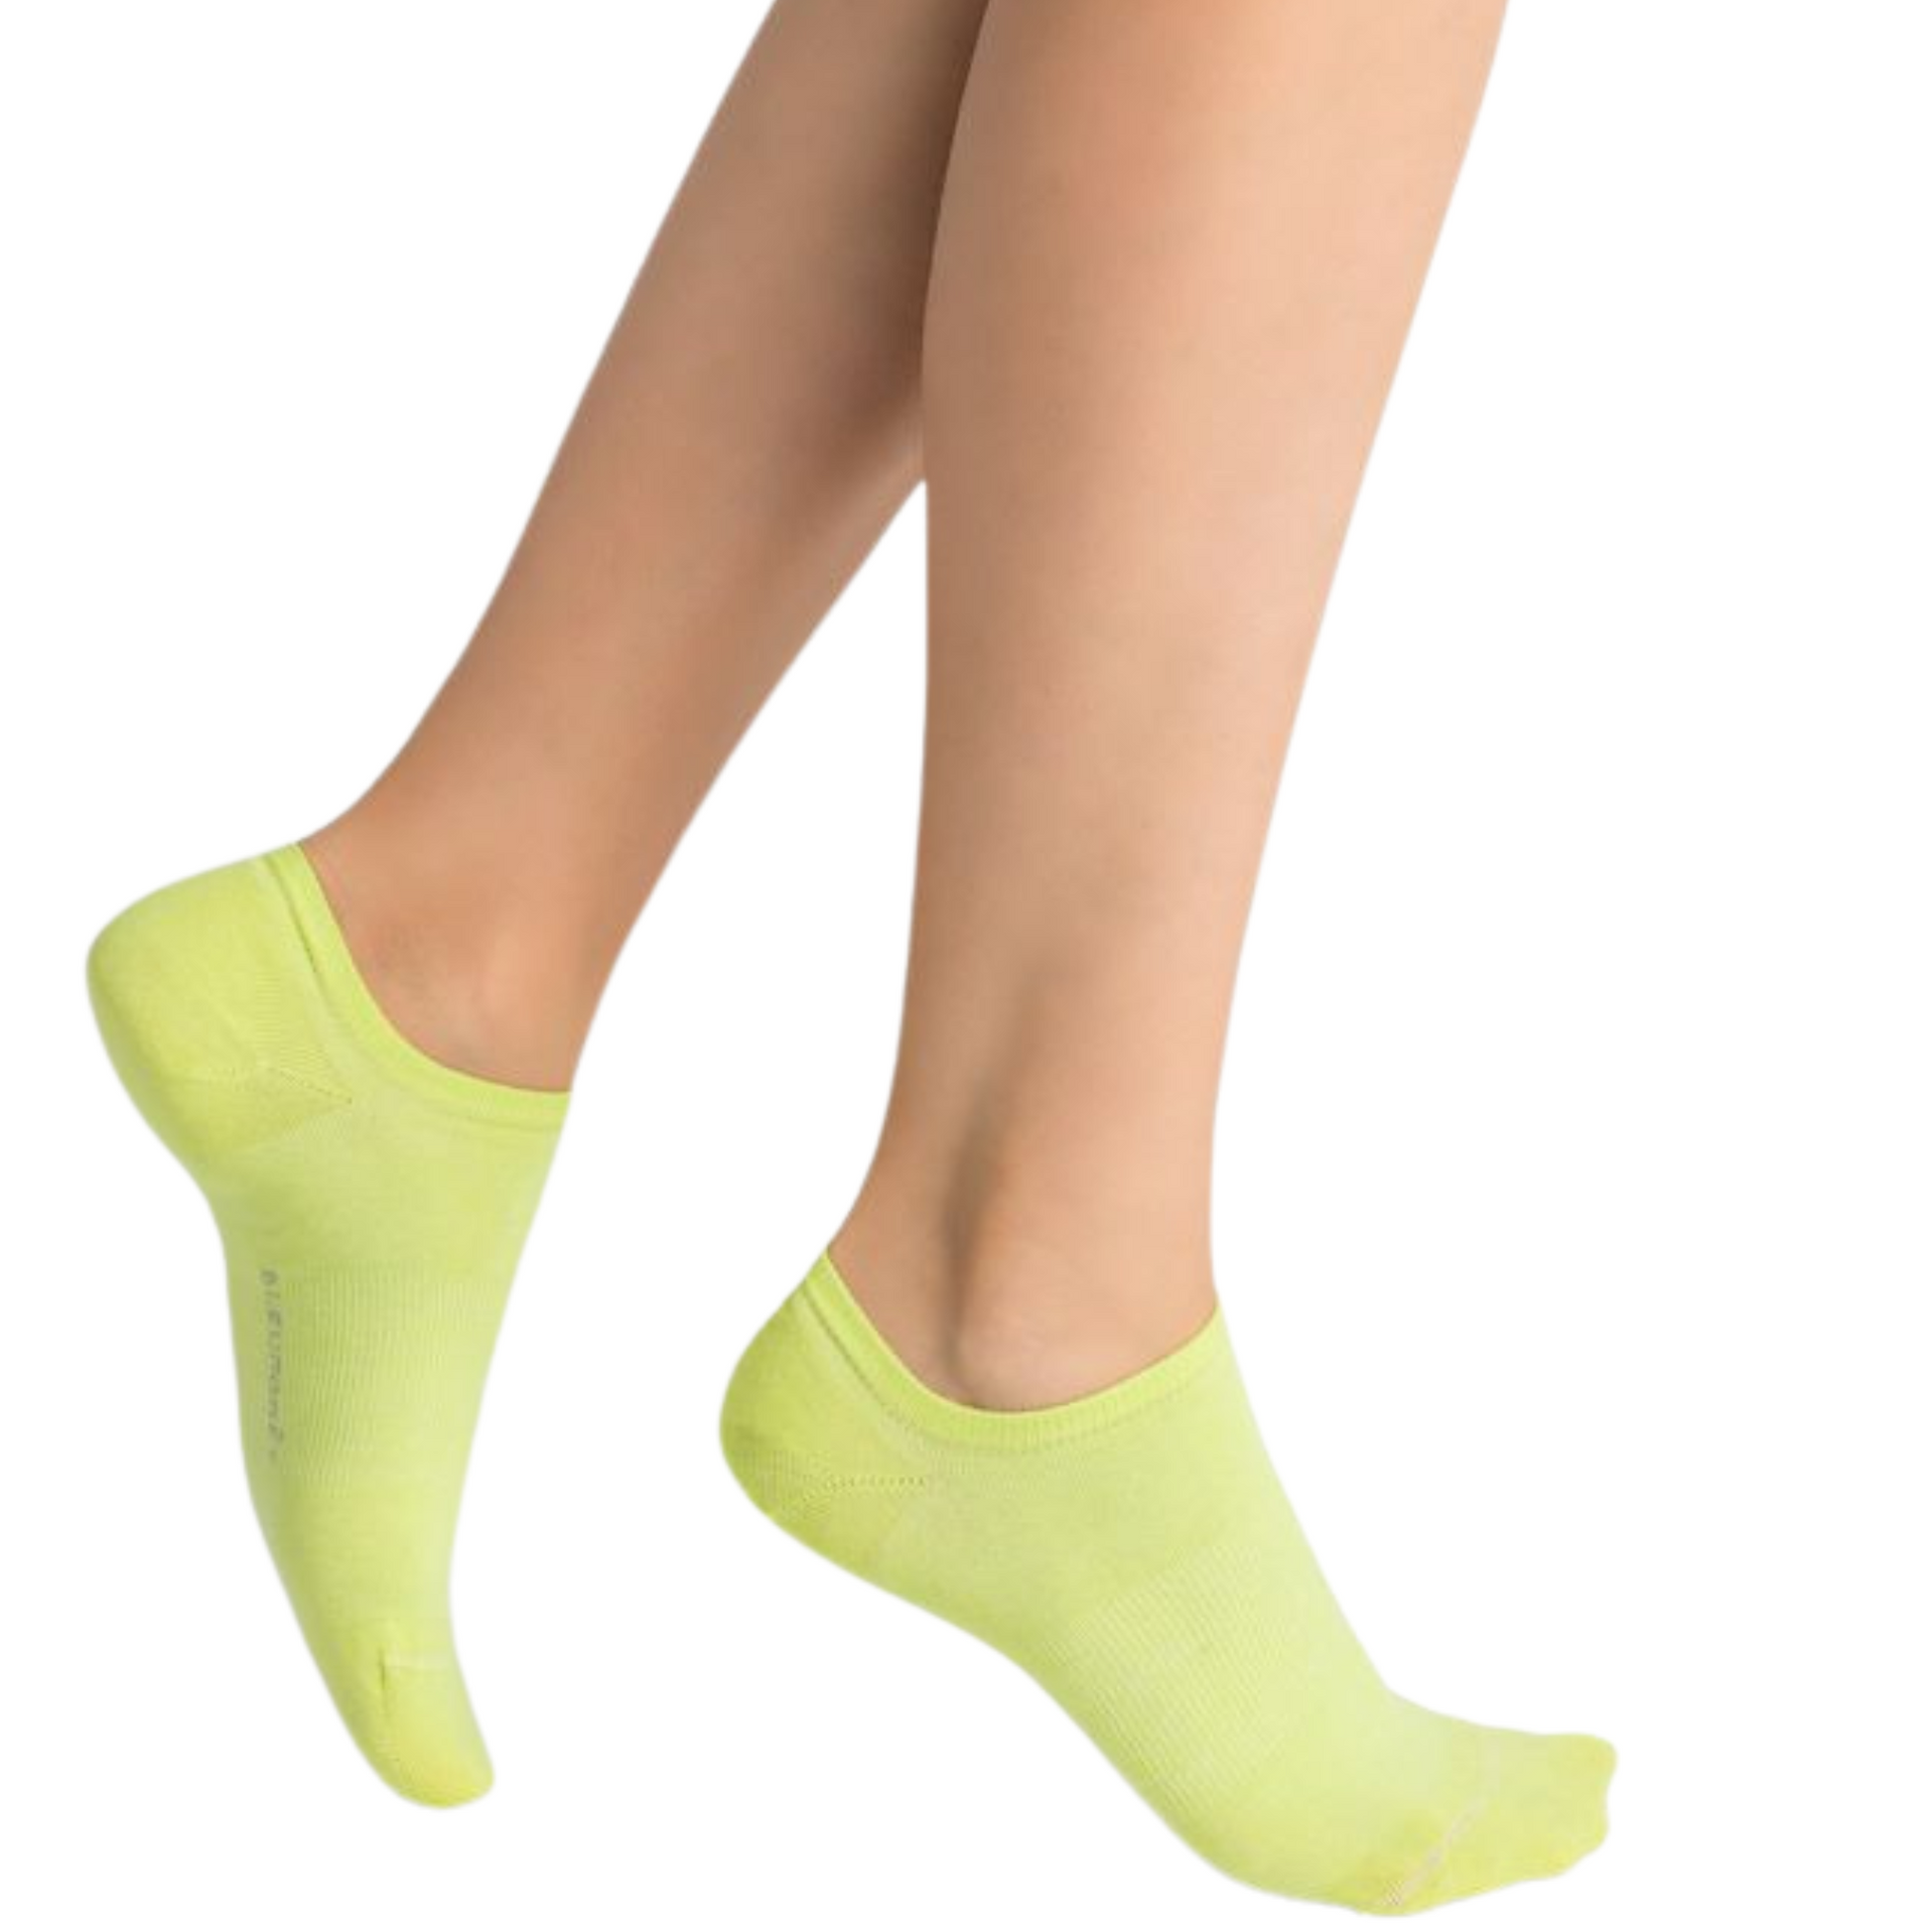 A pair of low cut ankle height socks in the colour lemon is pictured.